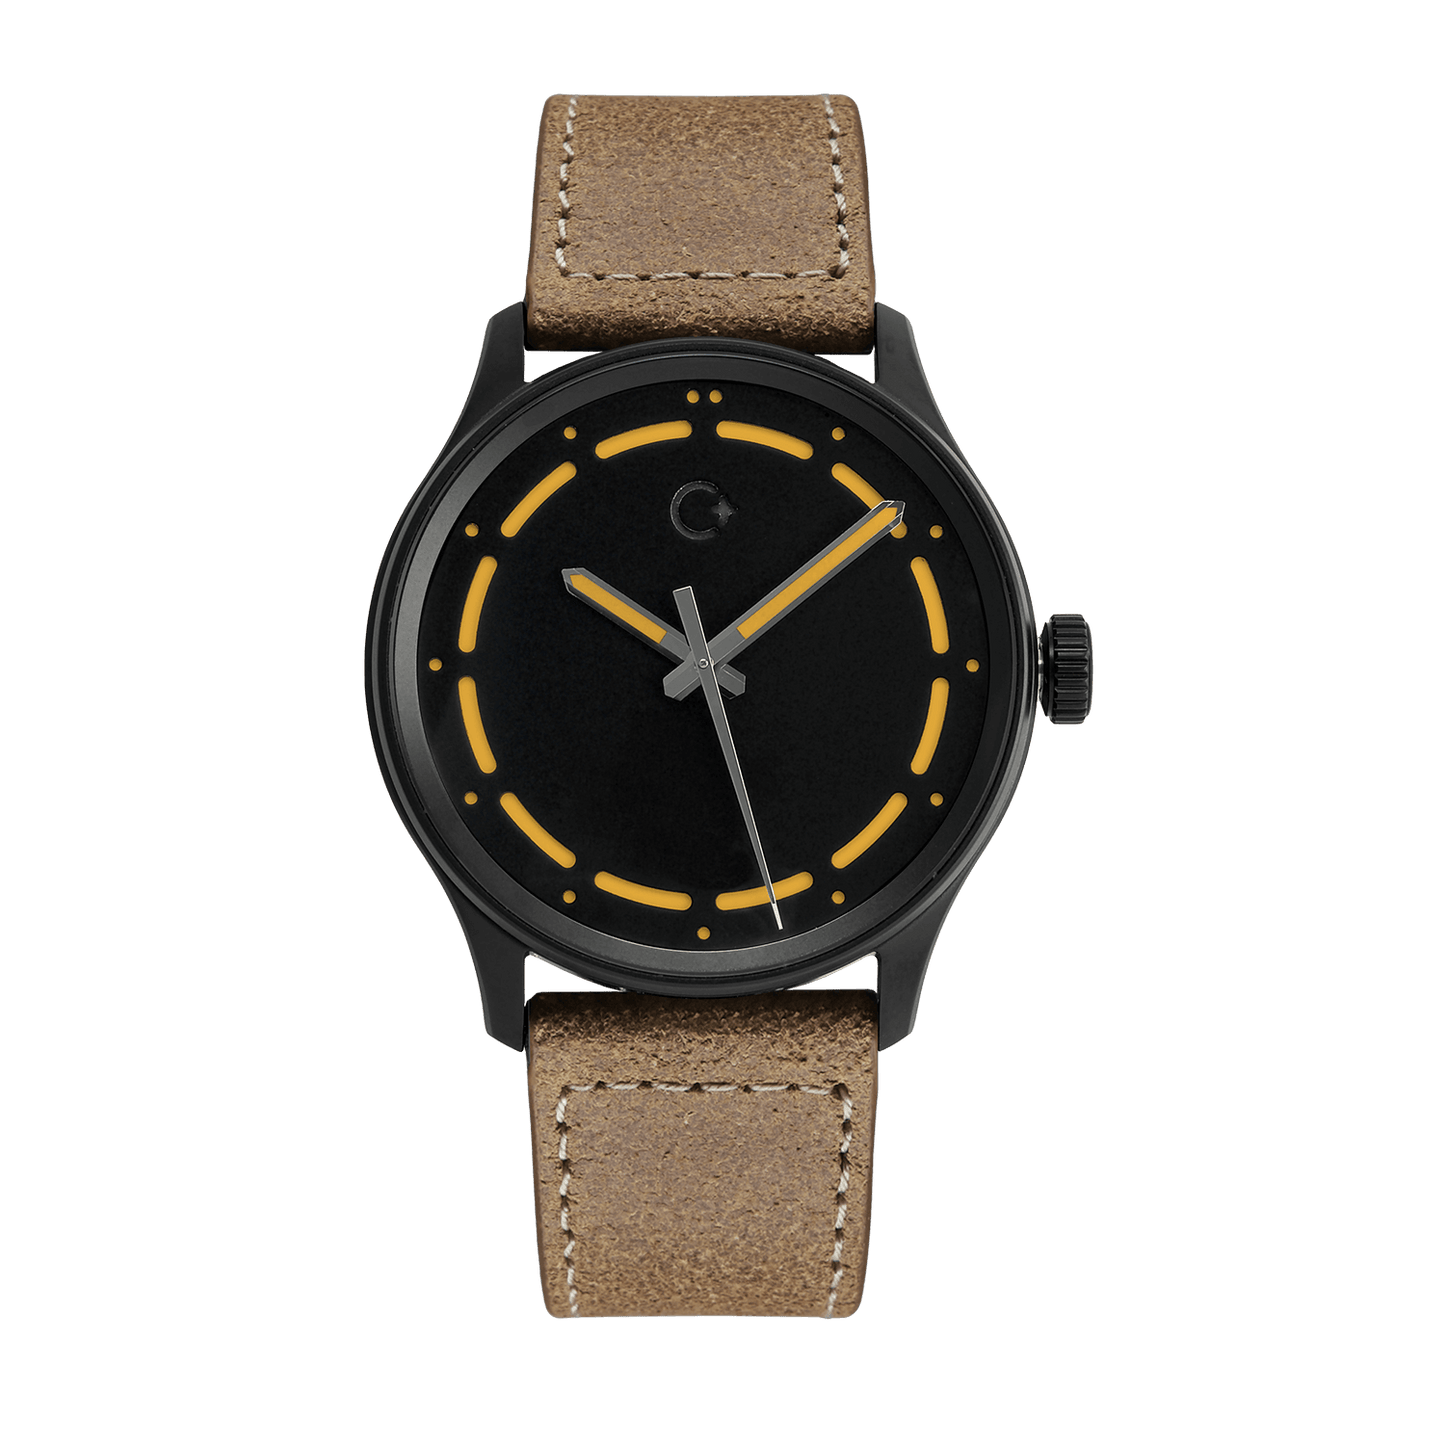 DLC Orange Nanoblack watch from Chronotechna, brown leather strap, 42mm case, Sellita SW200-1 movement, accurate, swiss made